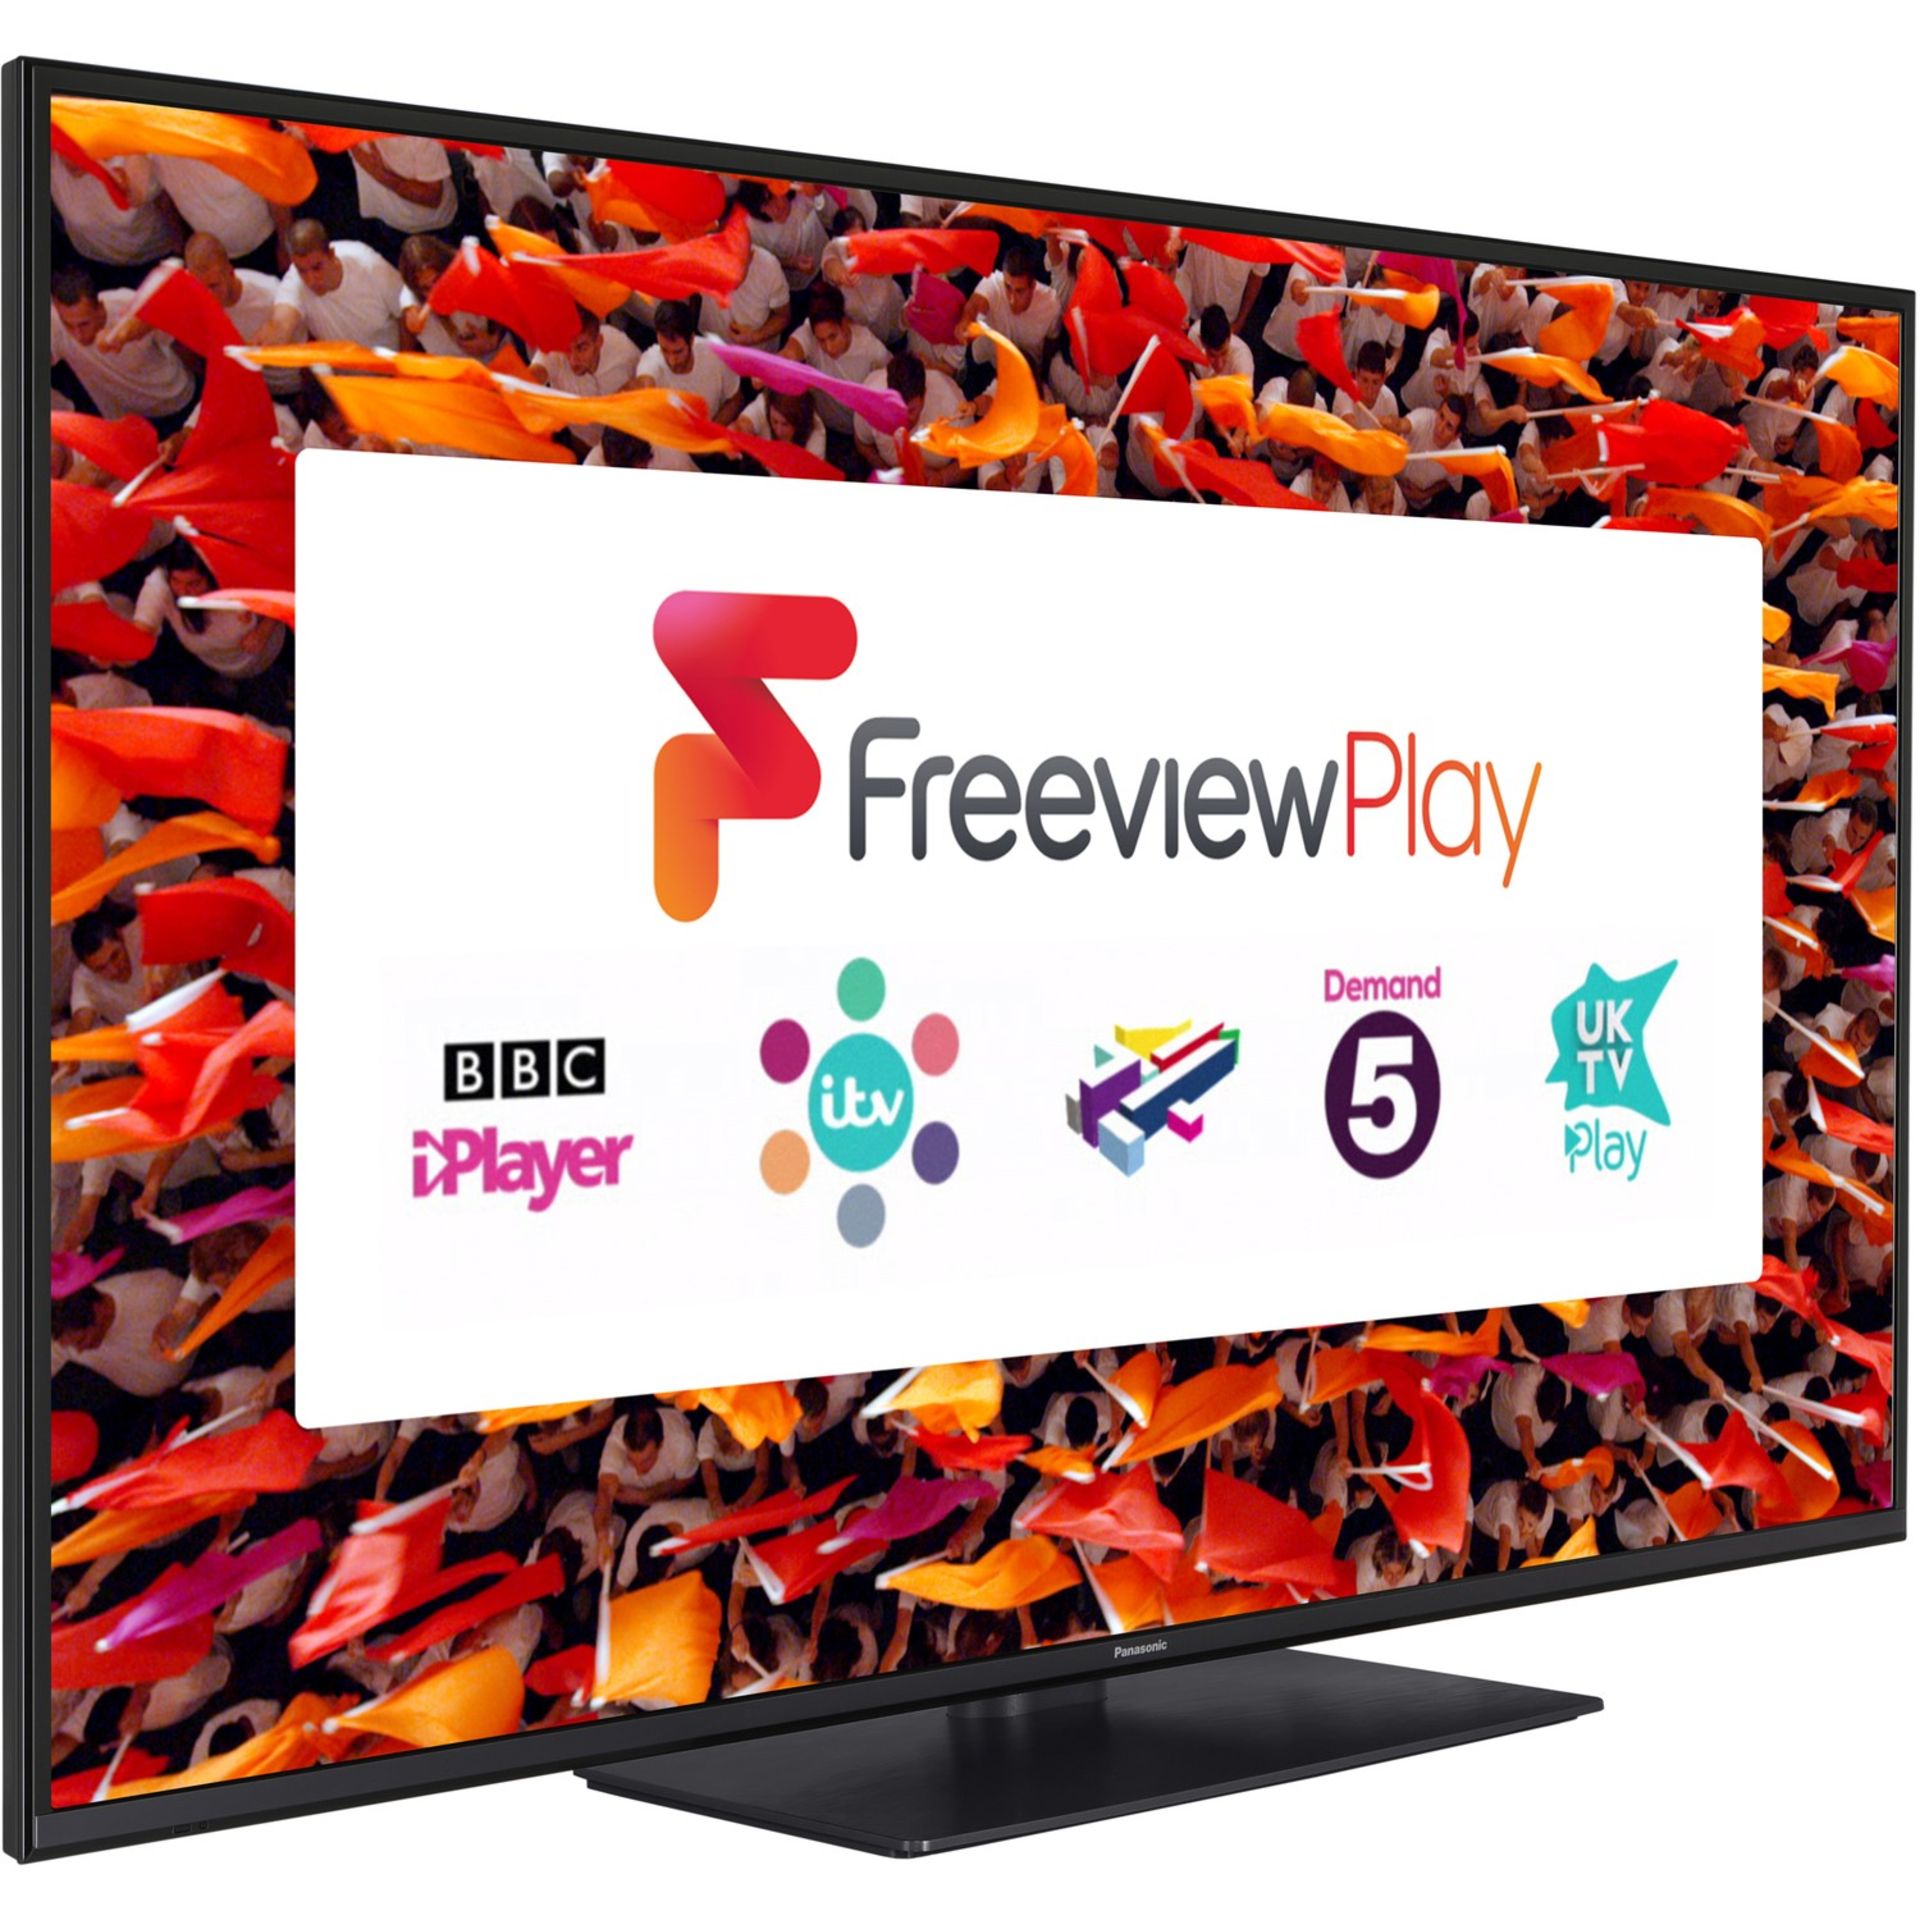 1 PANASONIC TX-43GX550B (2019) LED HDR 4K ULTRA HD SMART TV, 43" WITH FREEVIEW PLAY WITH STAND